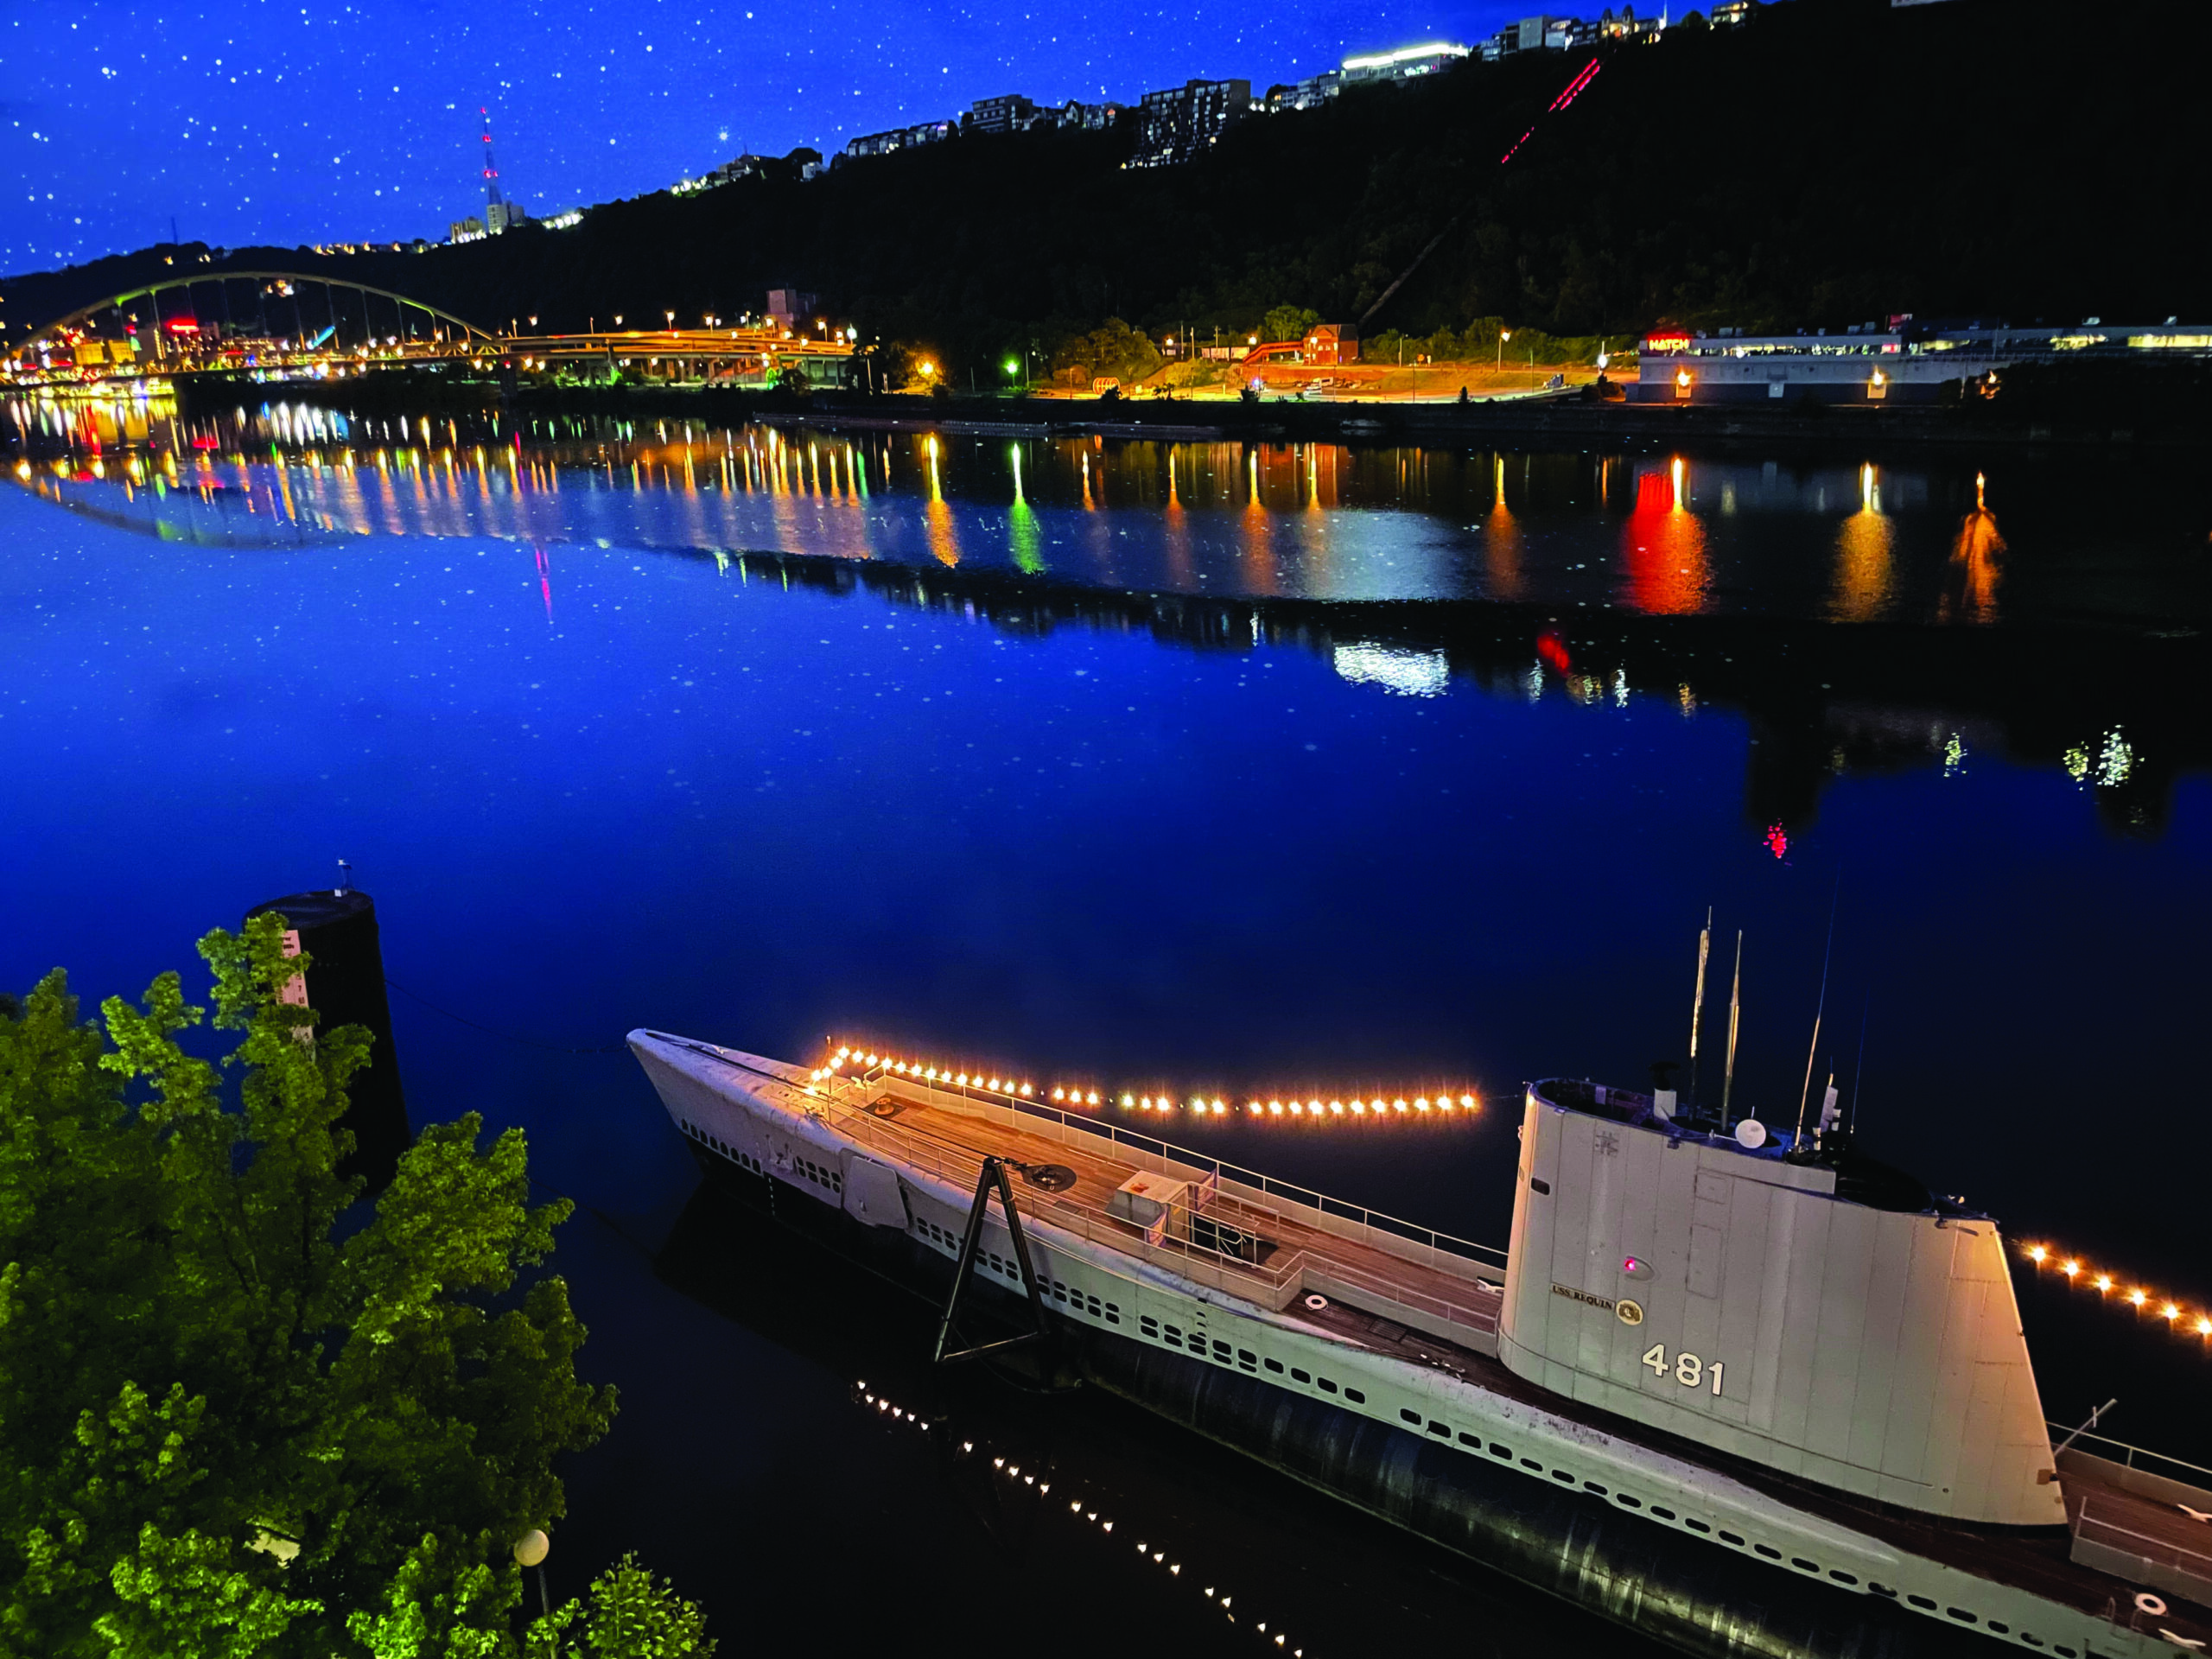 A colorful nighttime photo of the USS Requin (SS 481) Submarine on the river behind the Carnegie Science Center. Light from the bridge and buildings reflects off of the river.